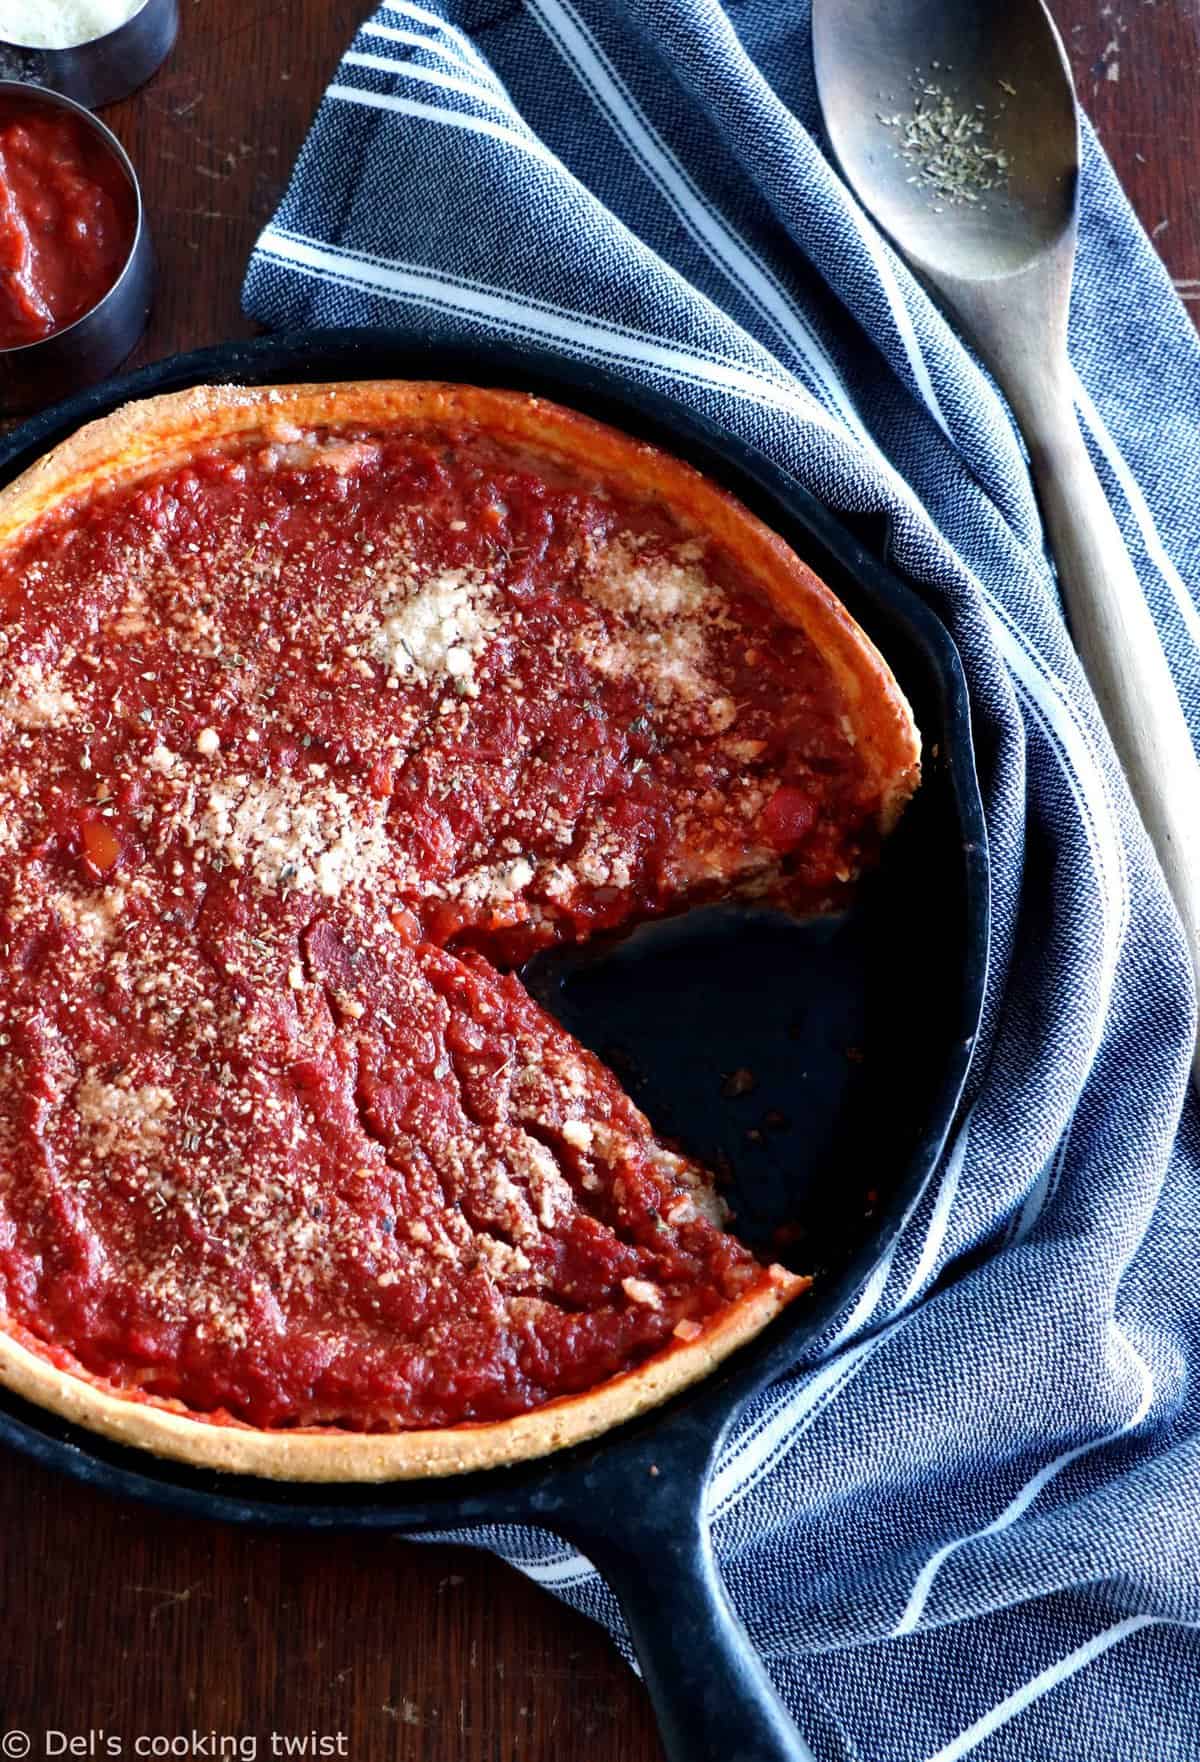 Discover the authentic Chicago-style deep dish pizza, made with a crunchy flaky crust and garnished with thick layers of cheese and tomato sauce.